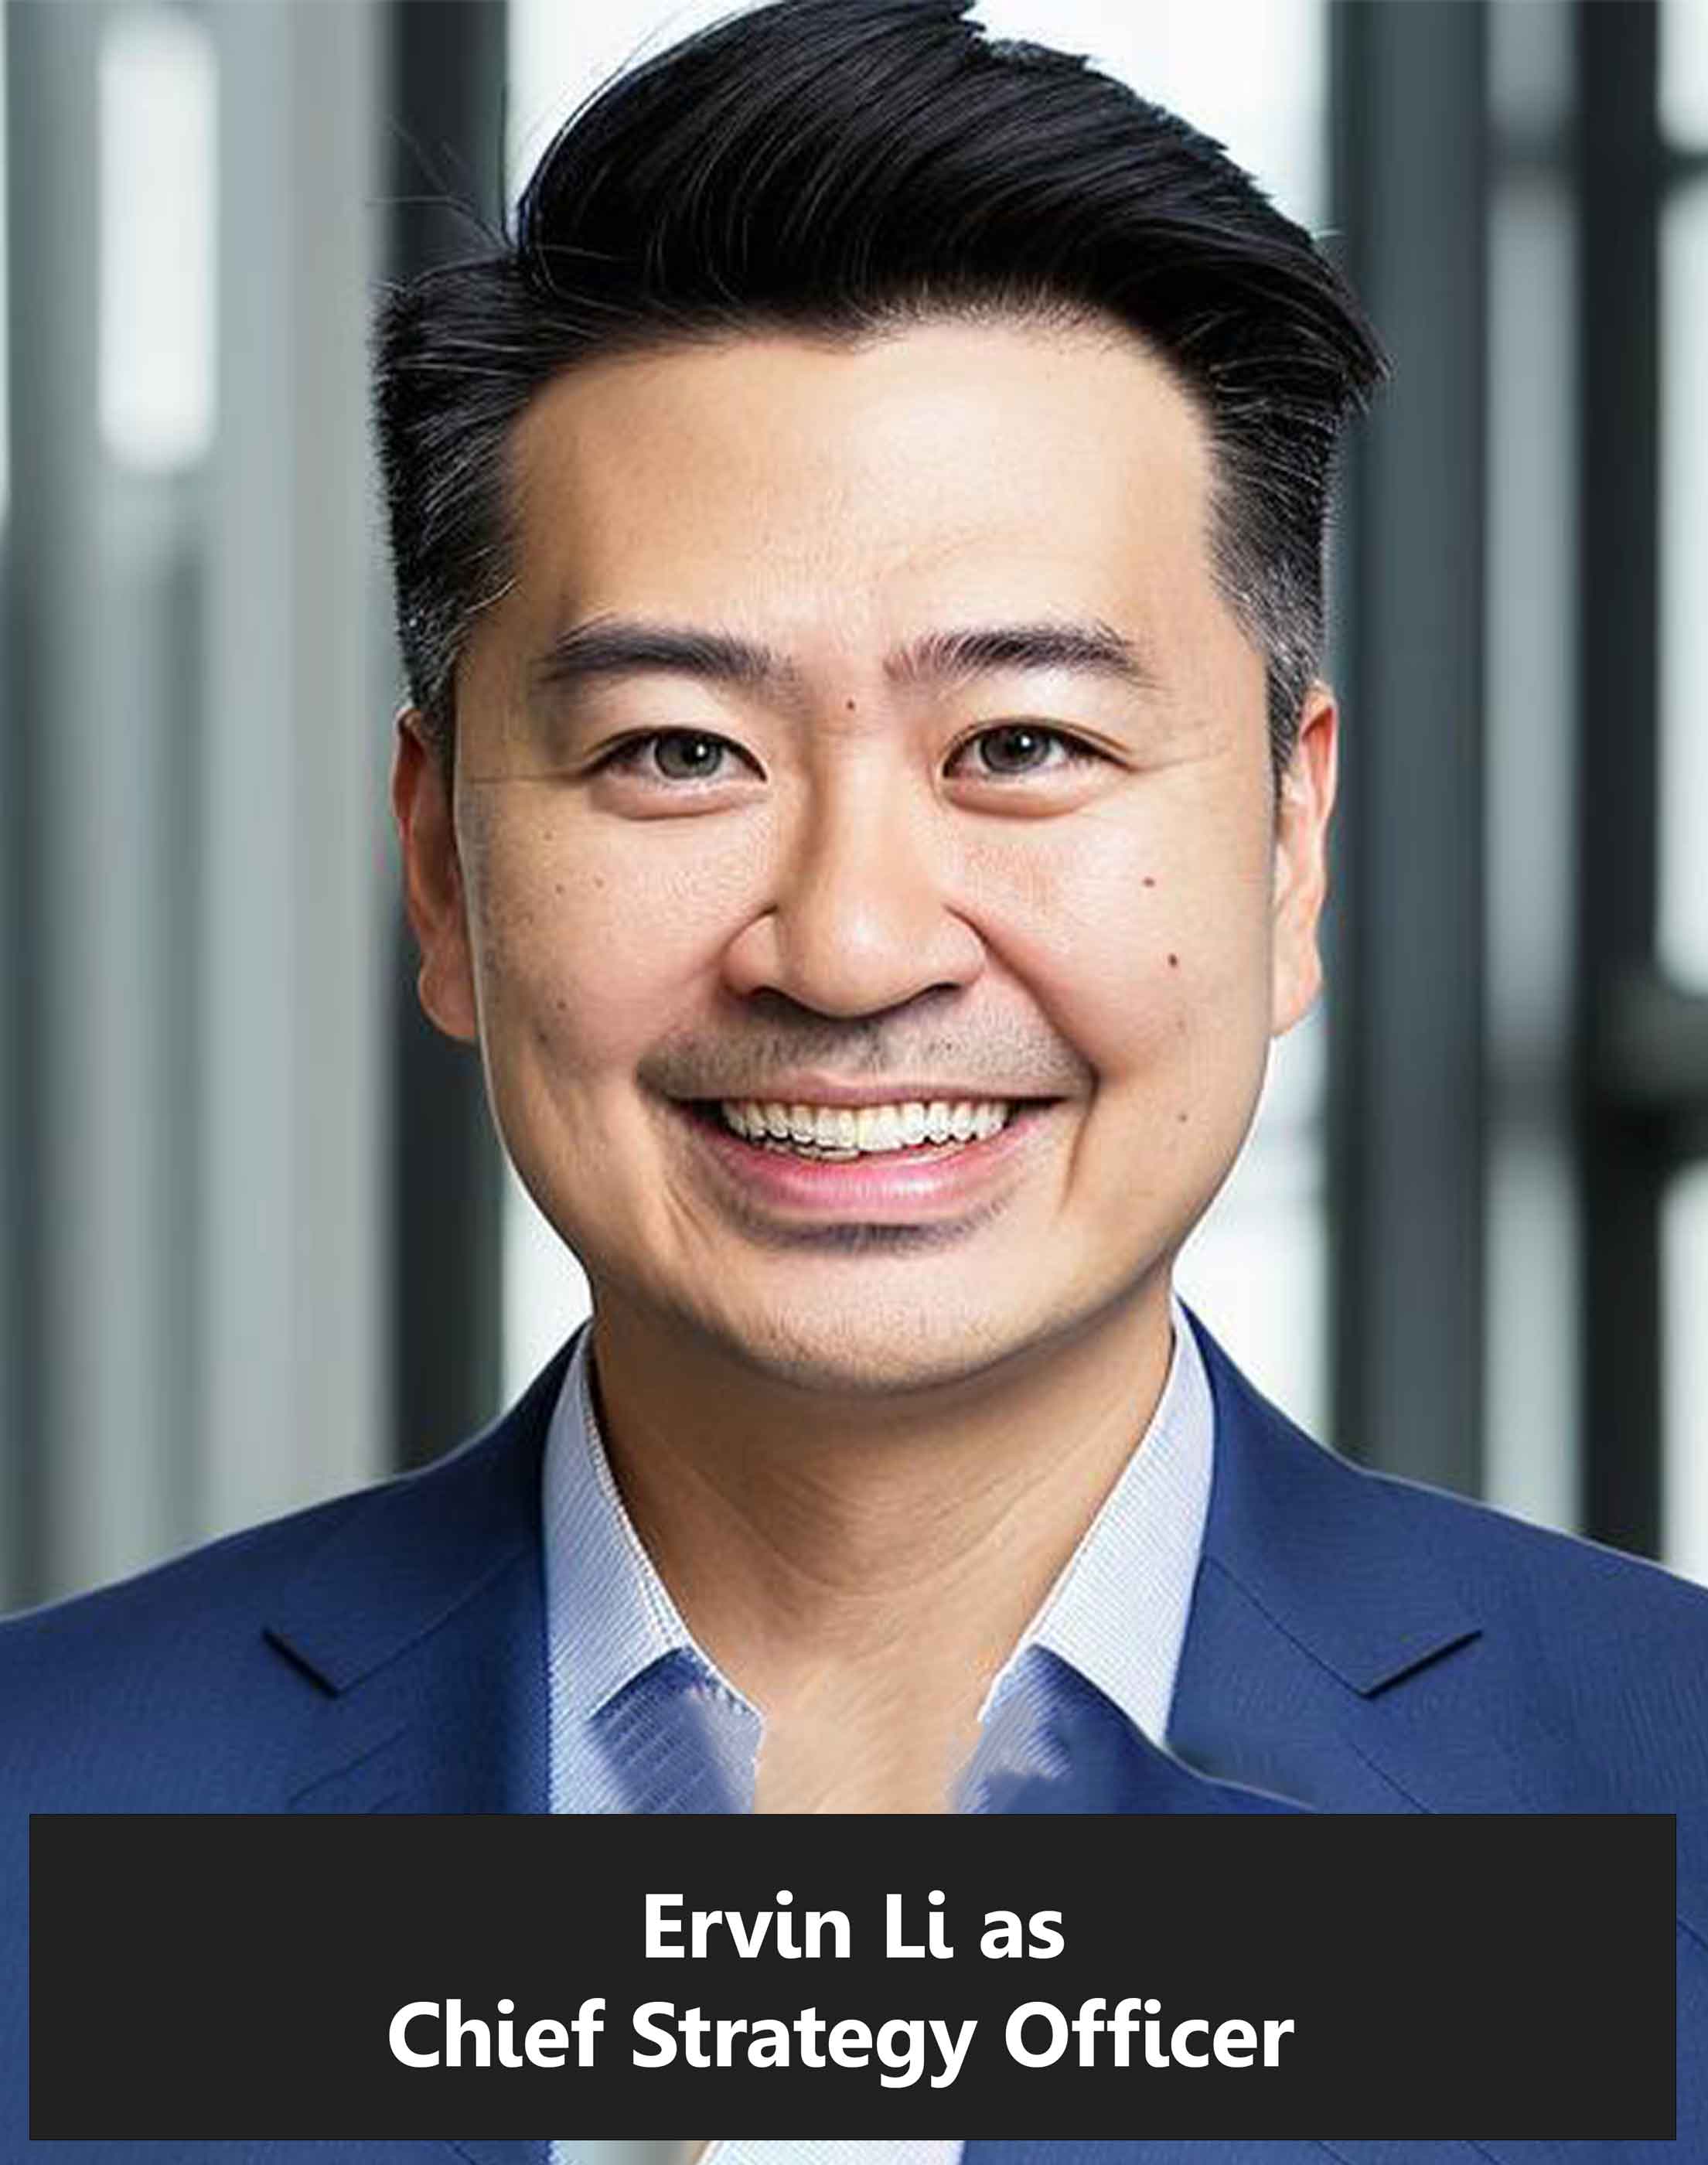 Ervin Li as Chief Strategy Officer